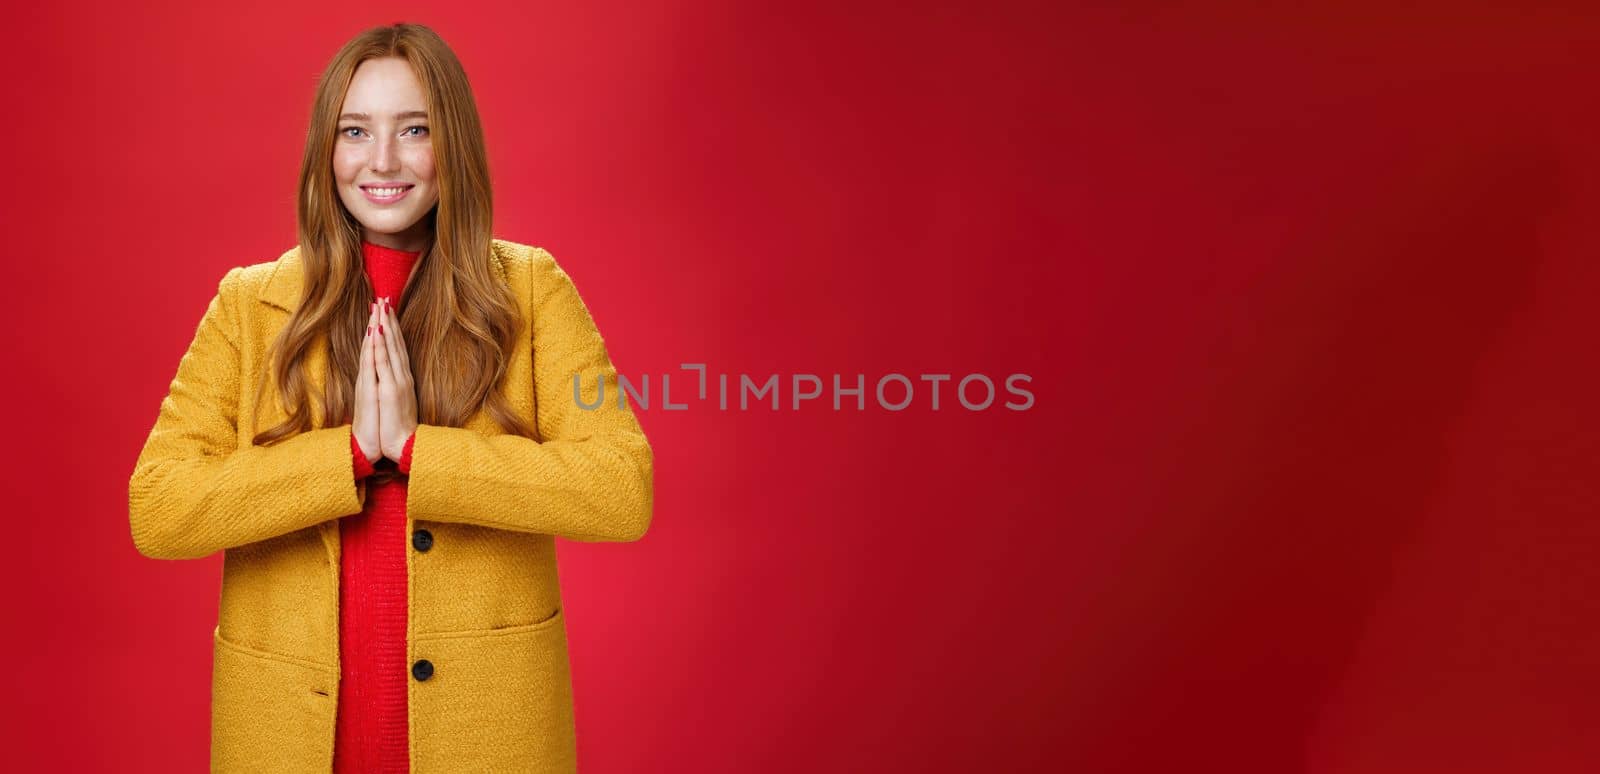 Girl welcomes us with buddhist namaste gesture pressing palms together over chest smiling friendly and delighted with carefree emotions holding hands in pray, posing happily over red background.